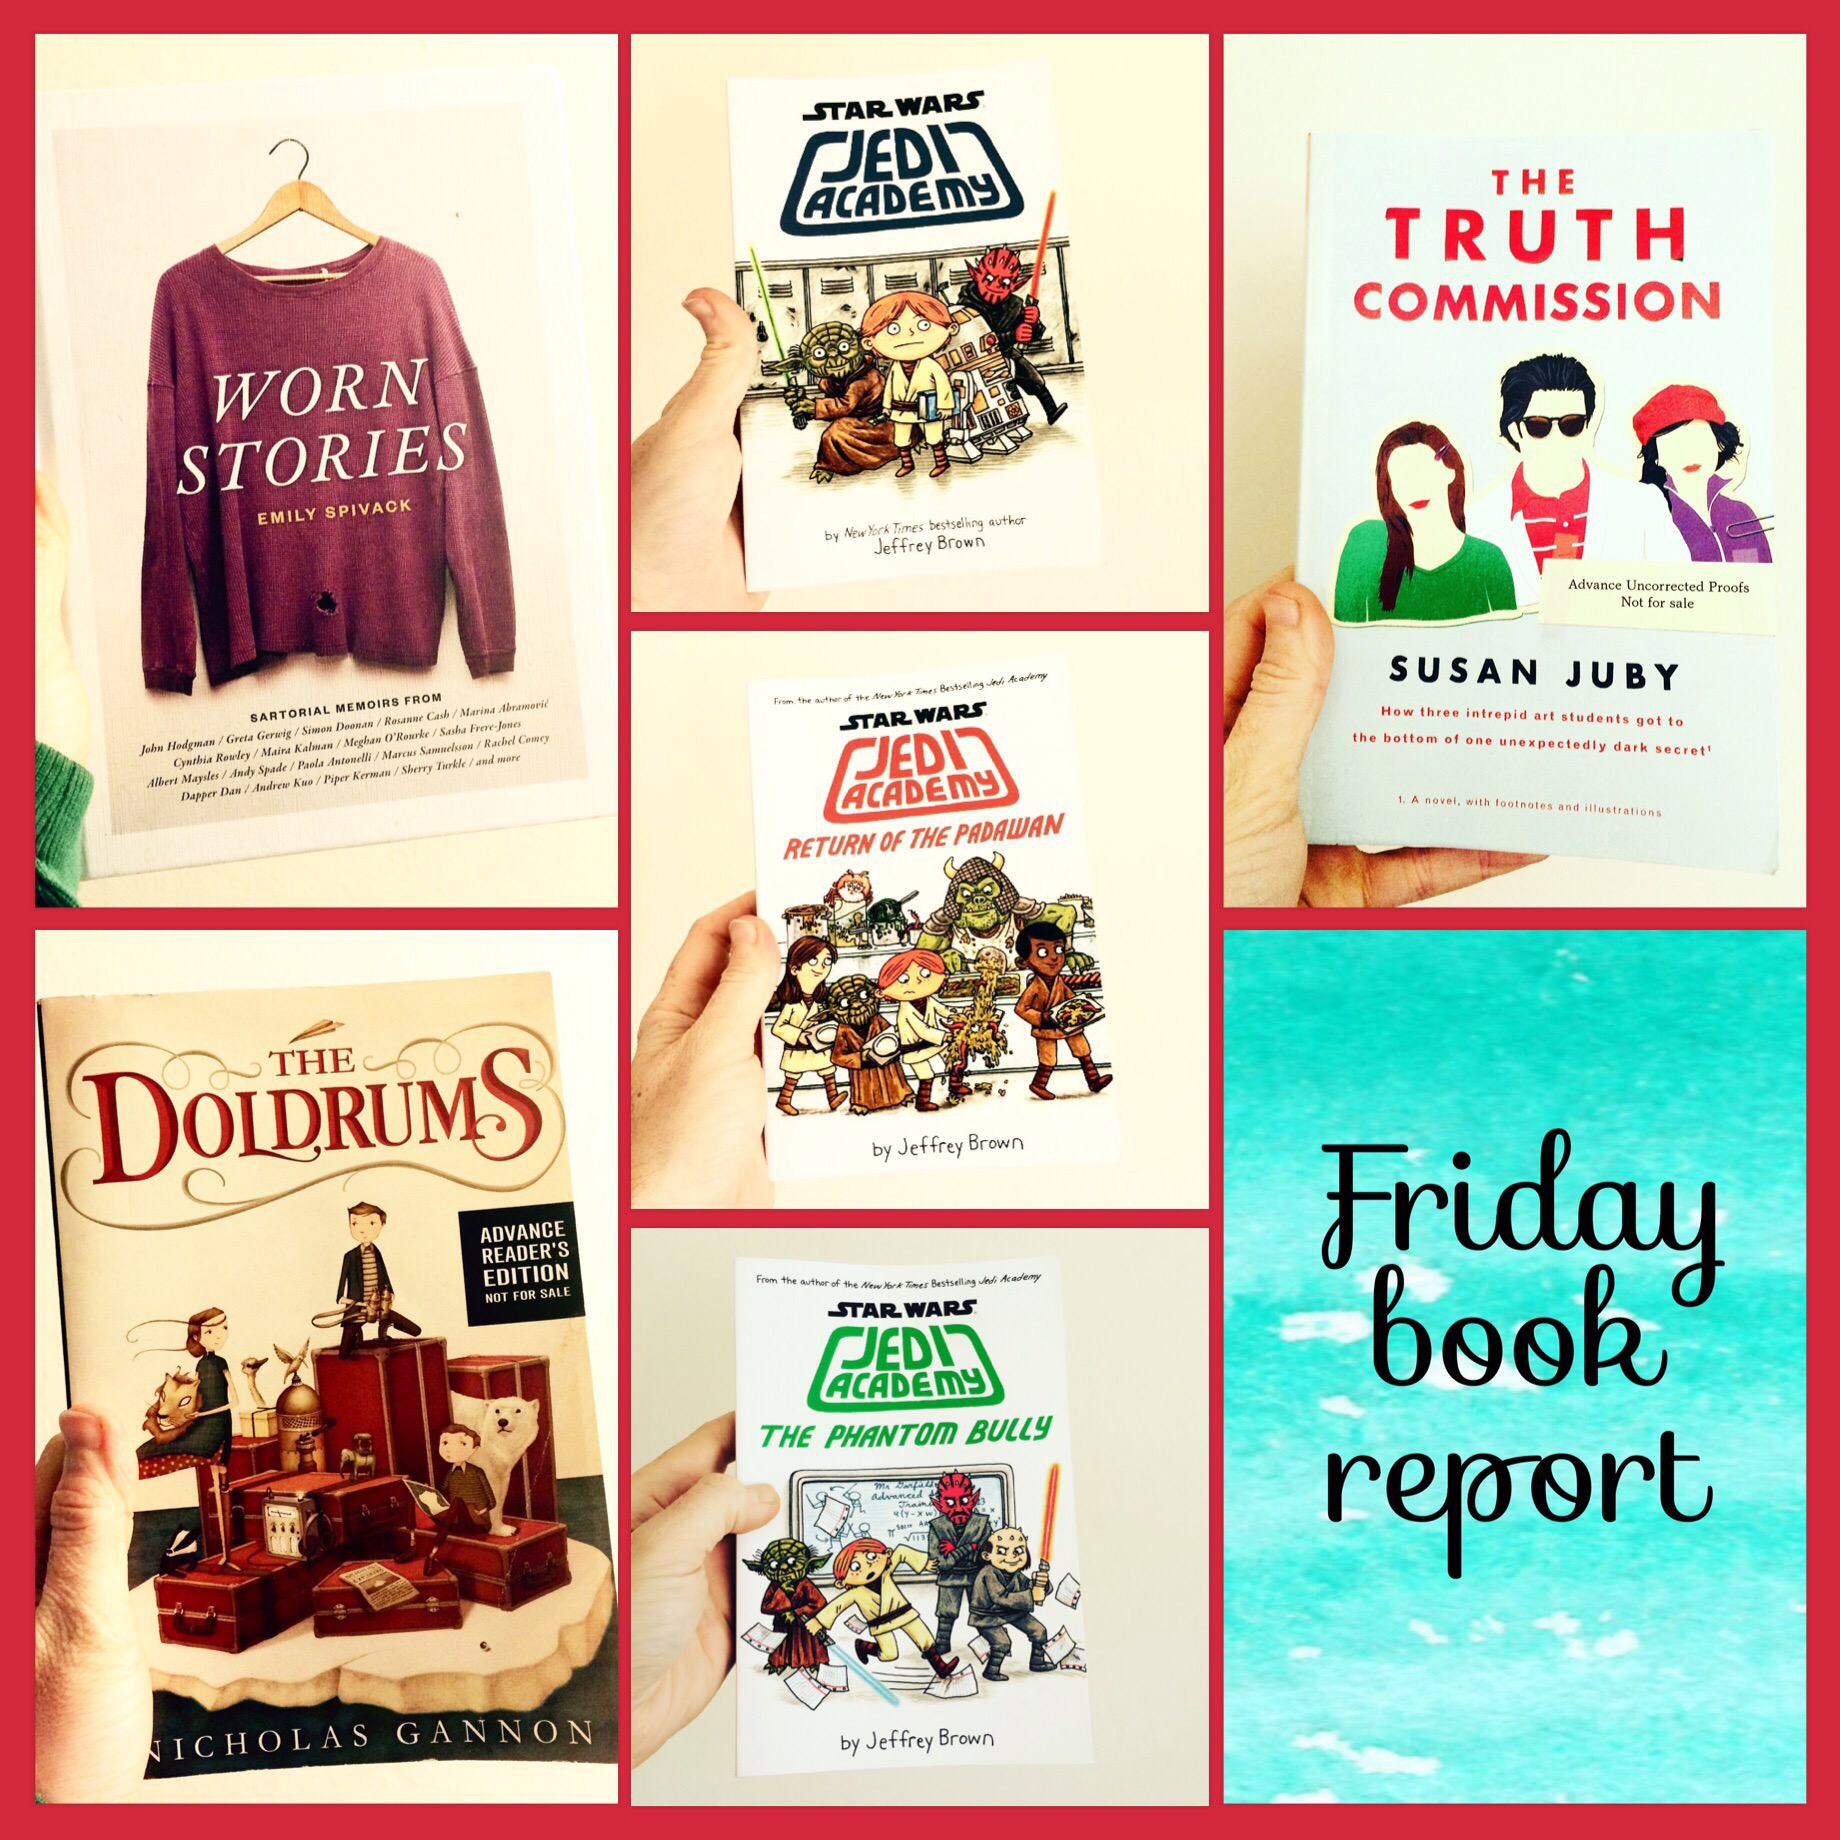 Friday book report